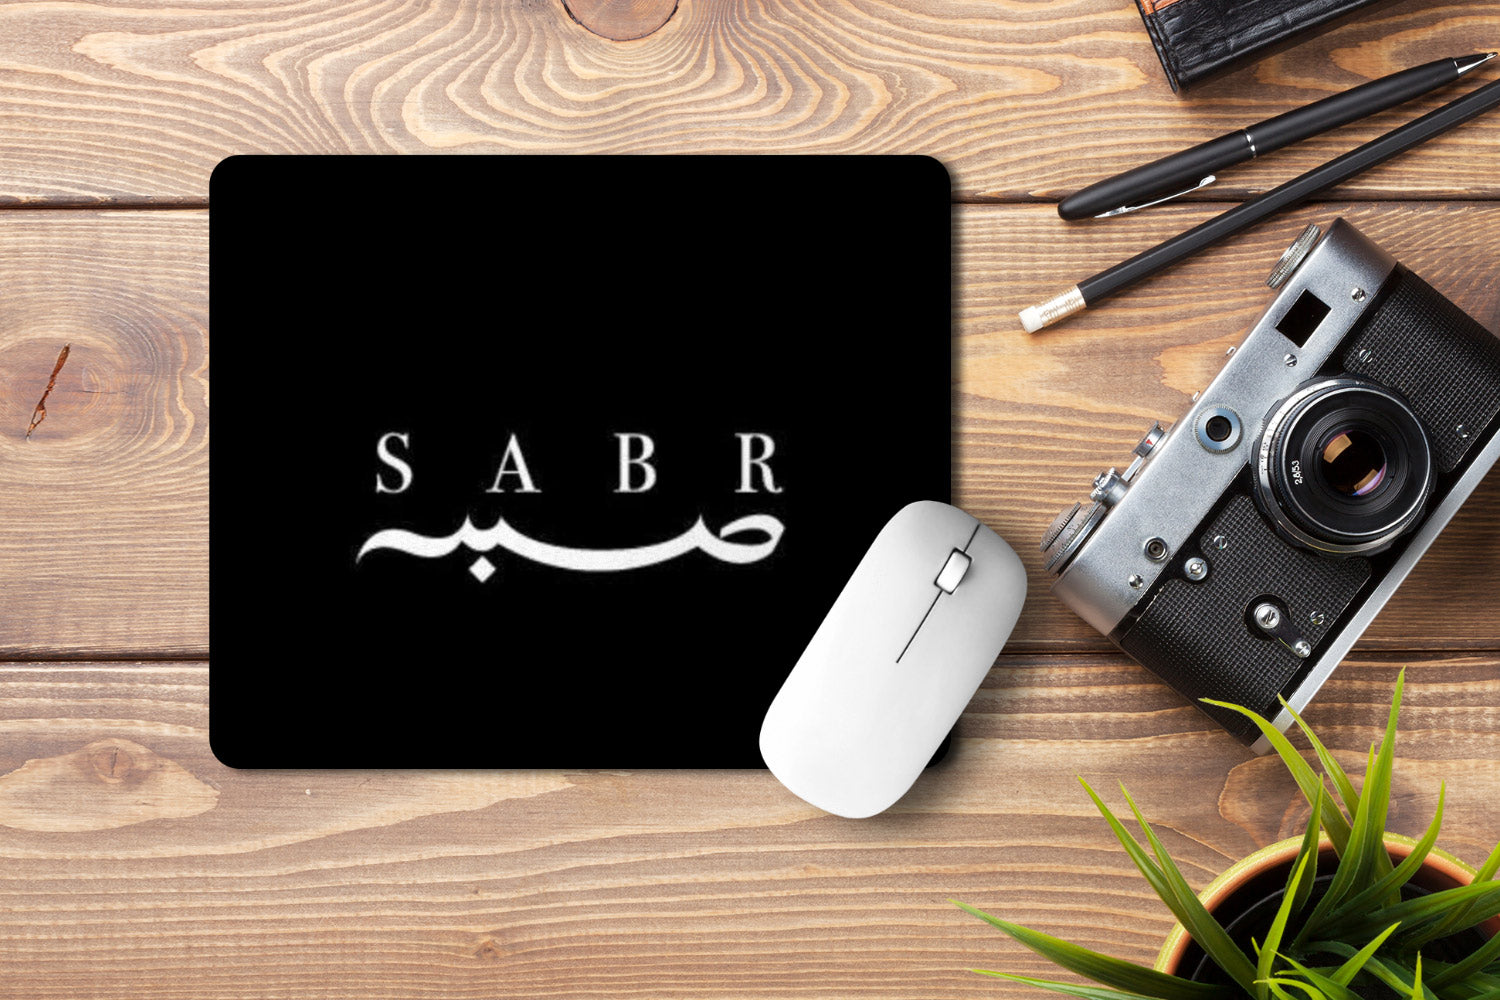 Sabr' Printed Non-Slip Rubber Base Mouse Pad for Laptop, PC, Computer.